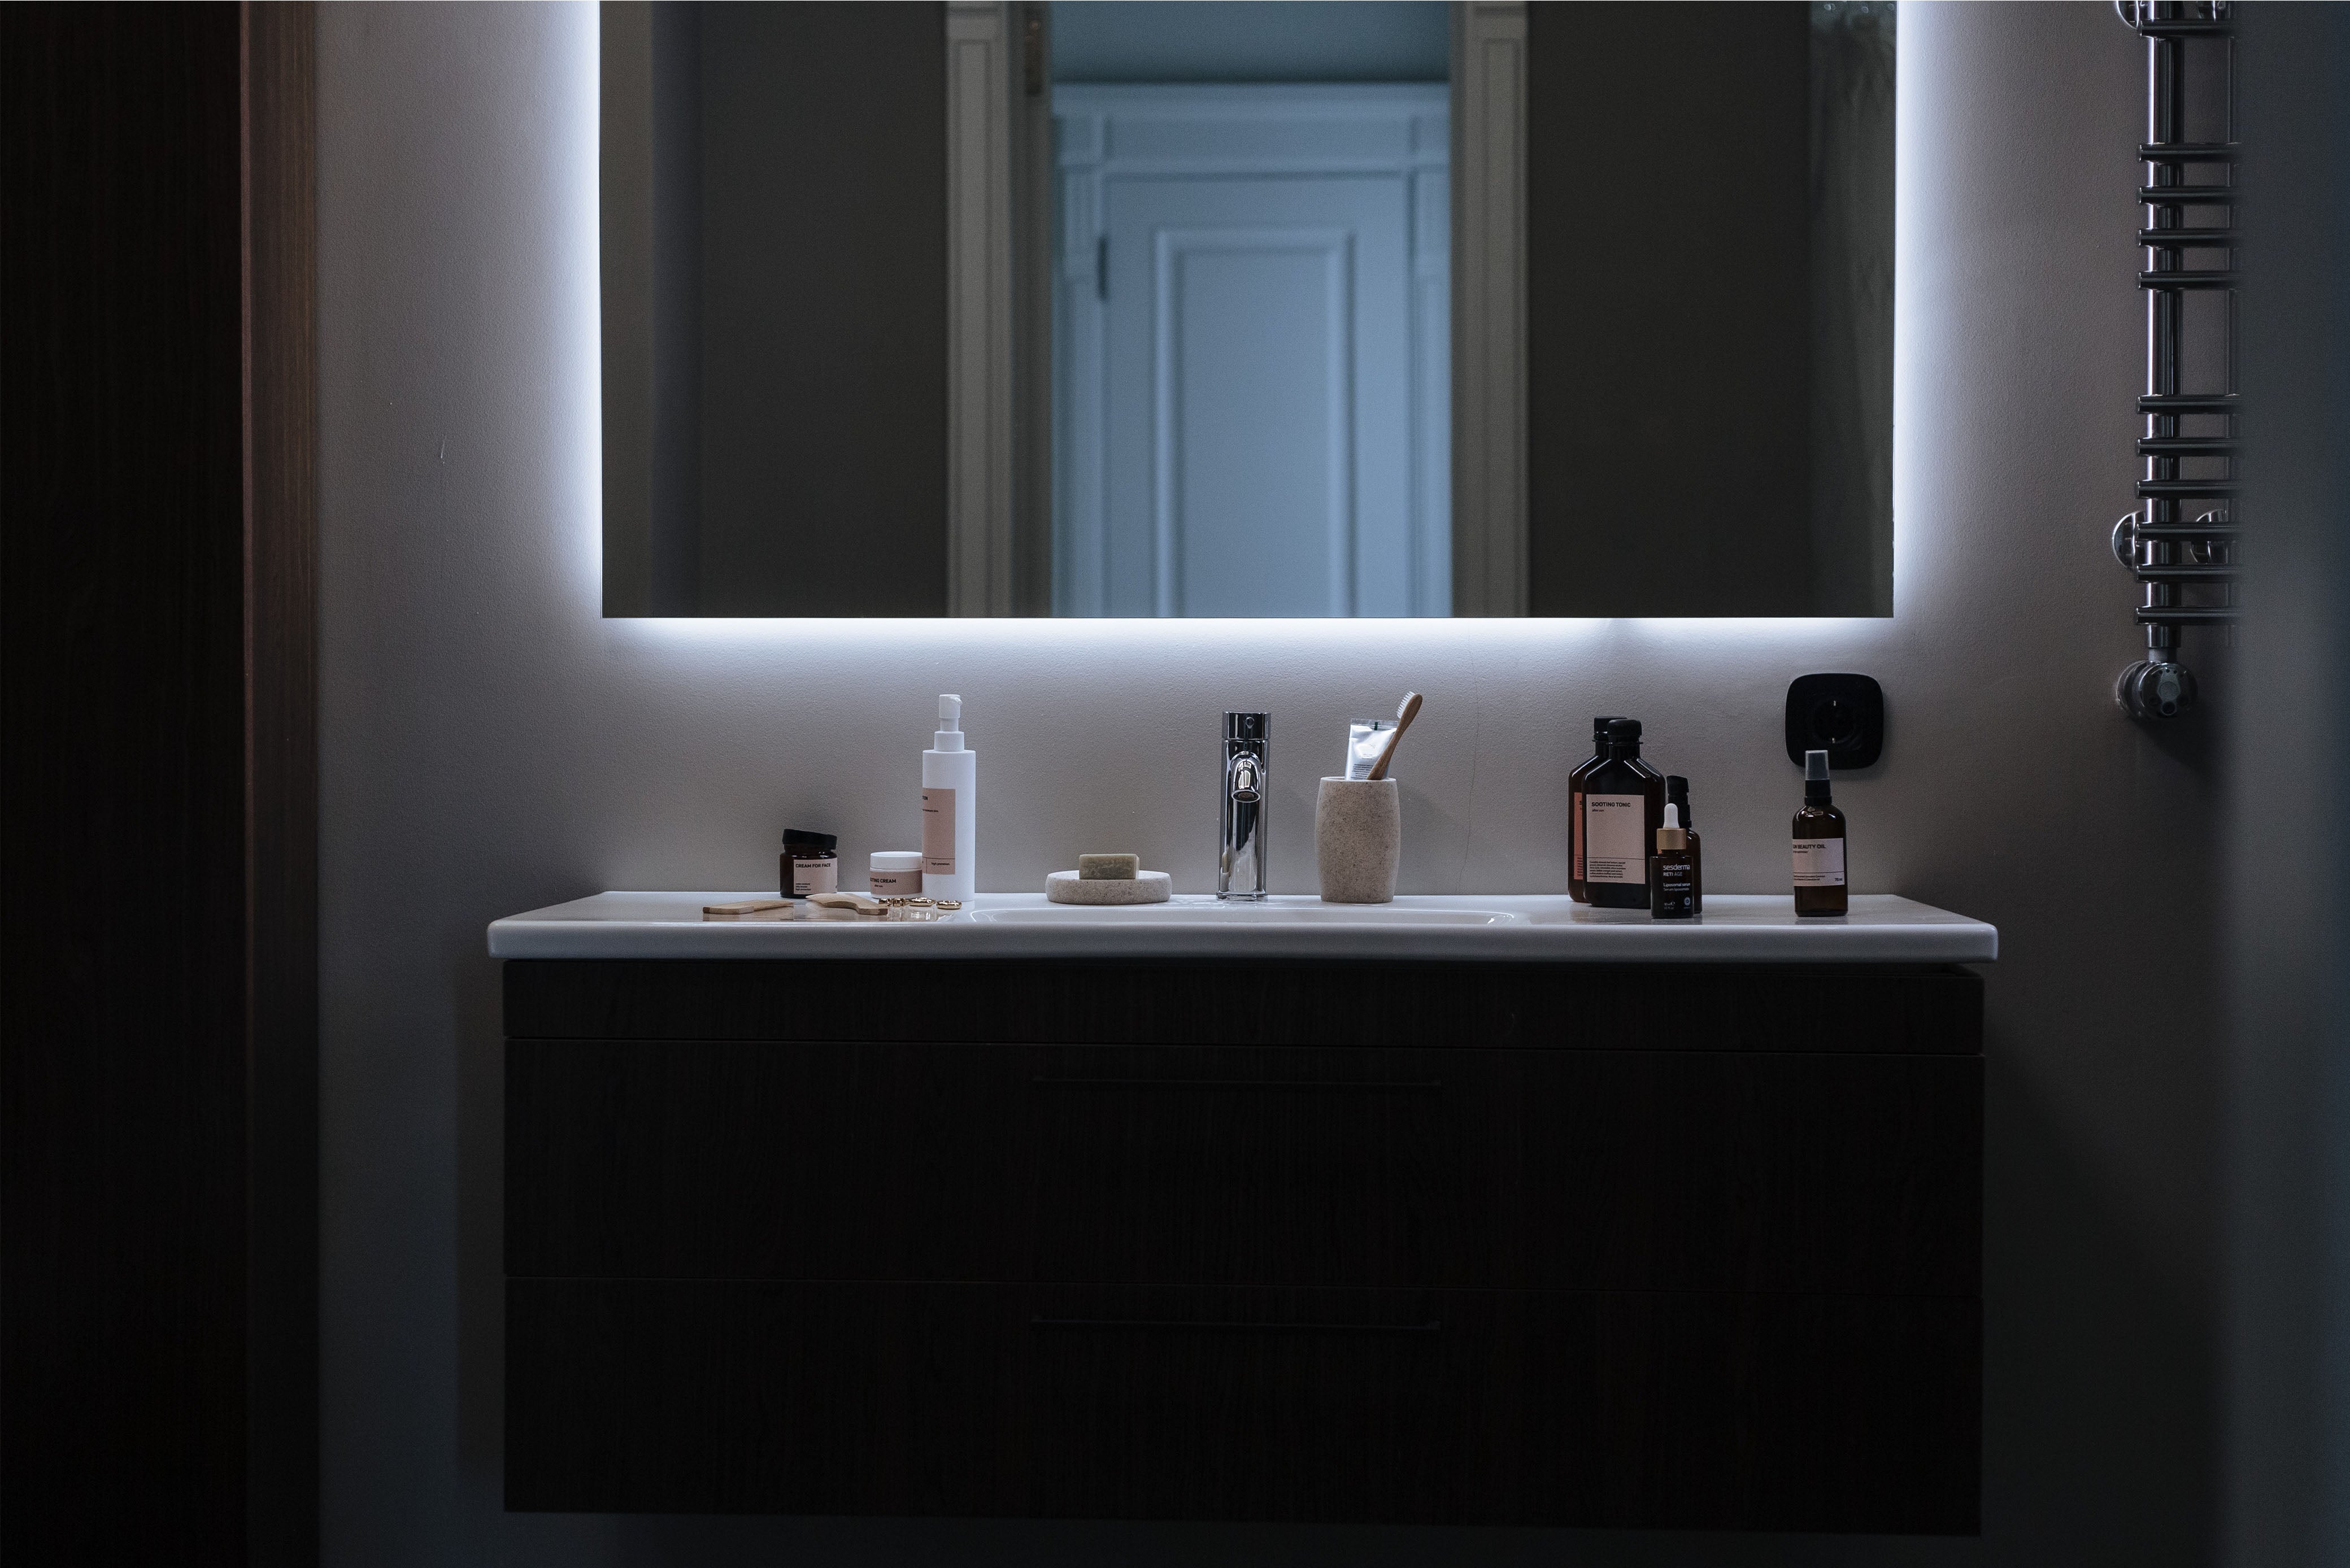 How To Choose An LED Mirror?